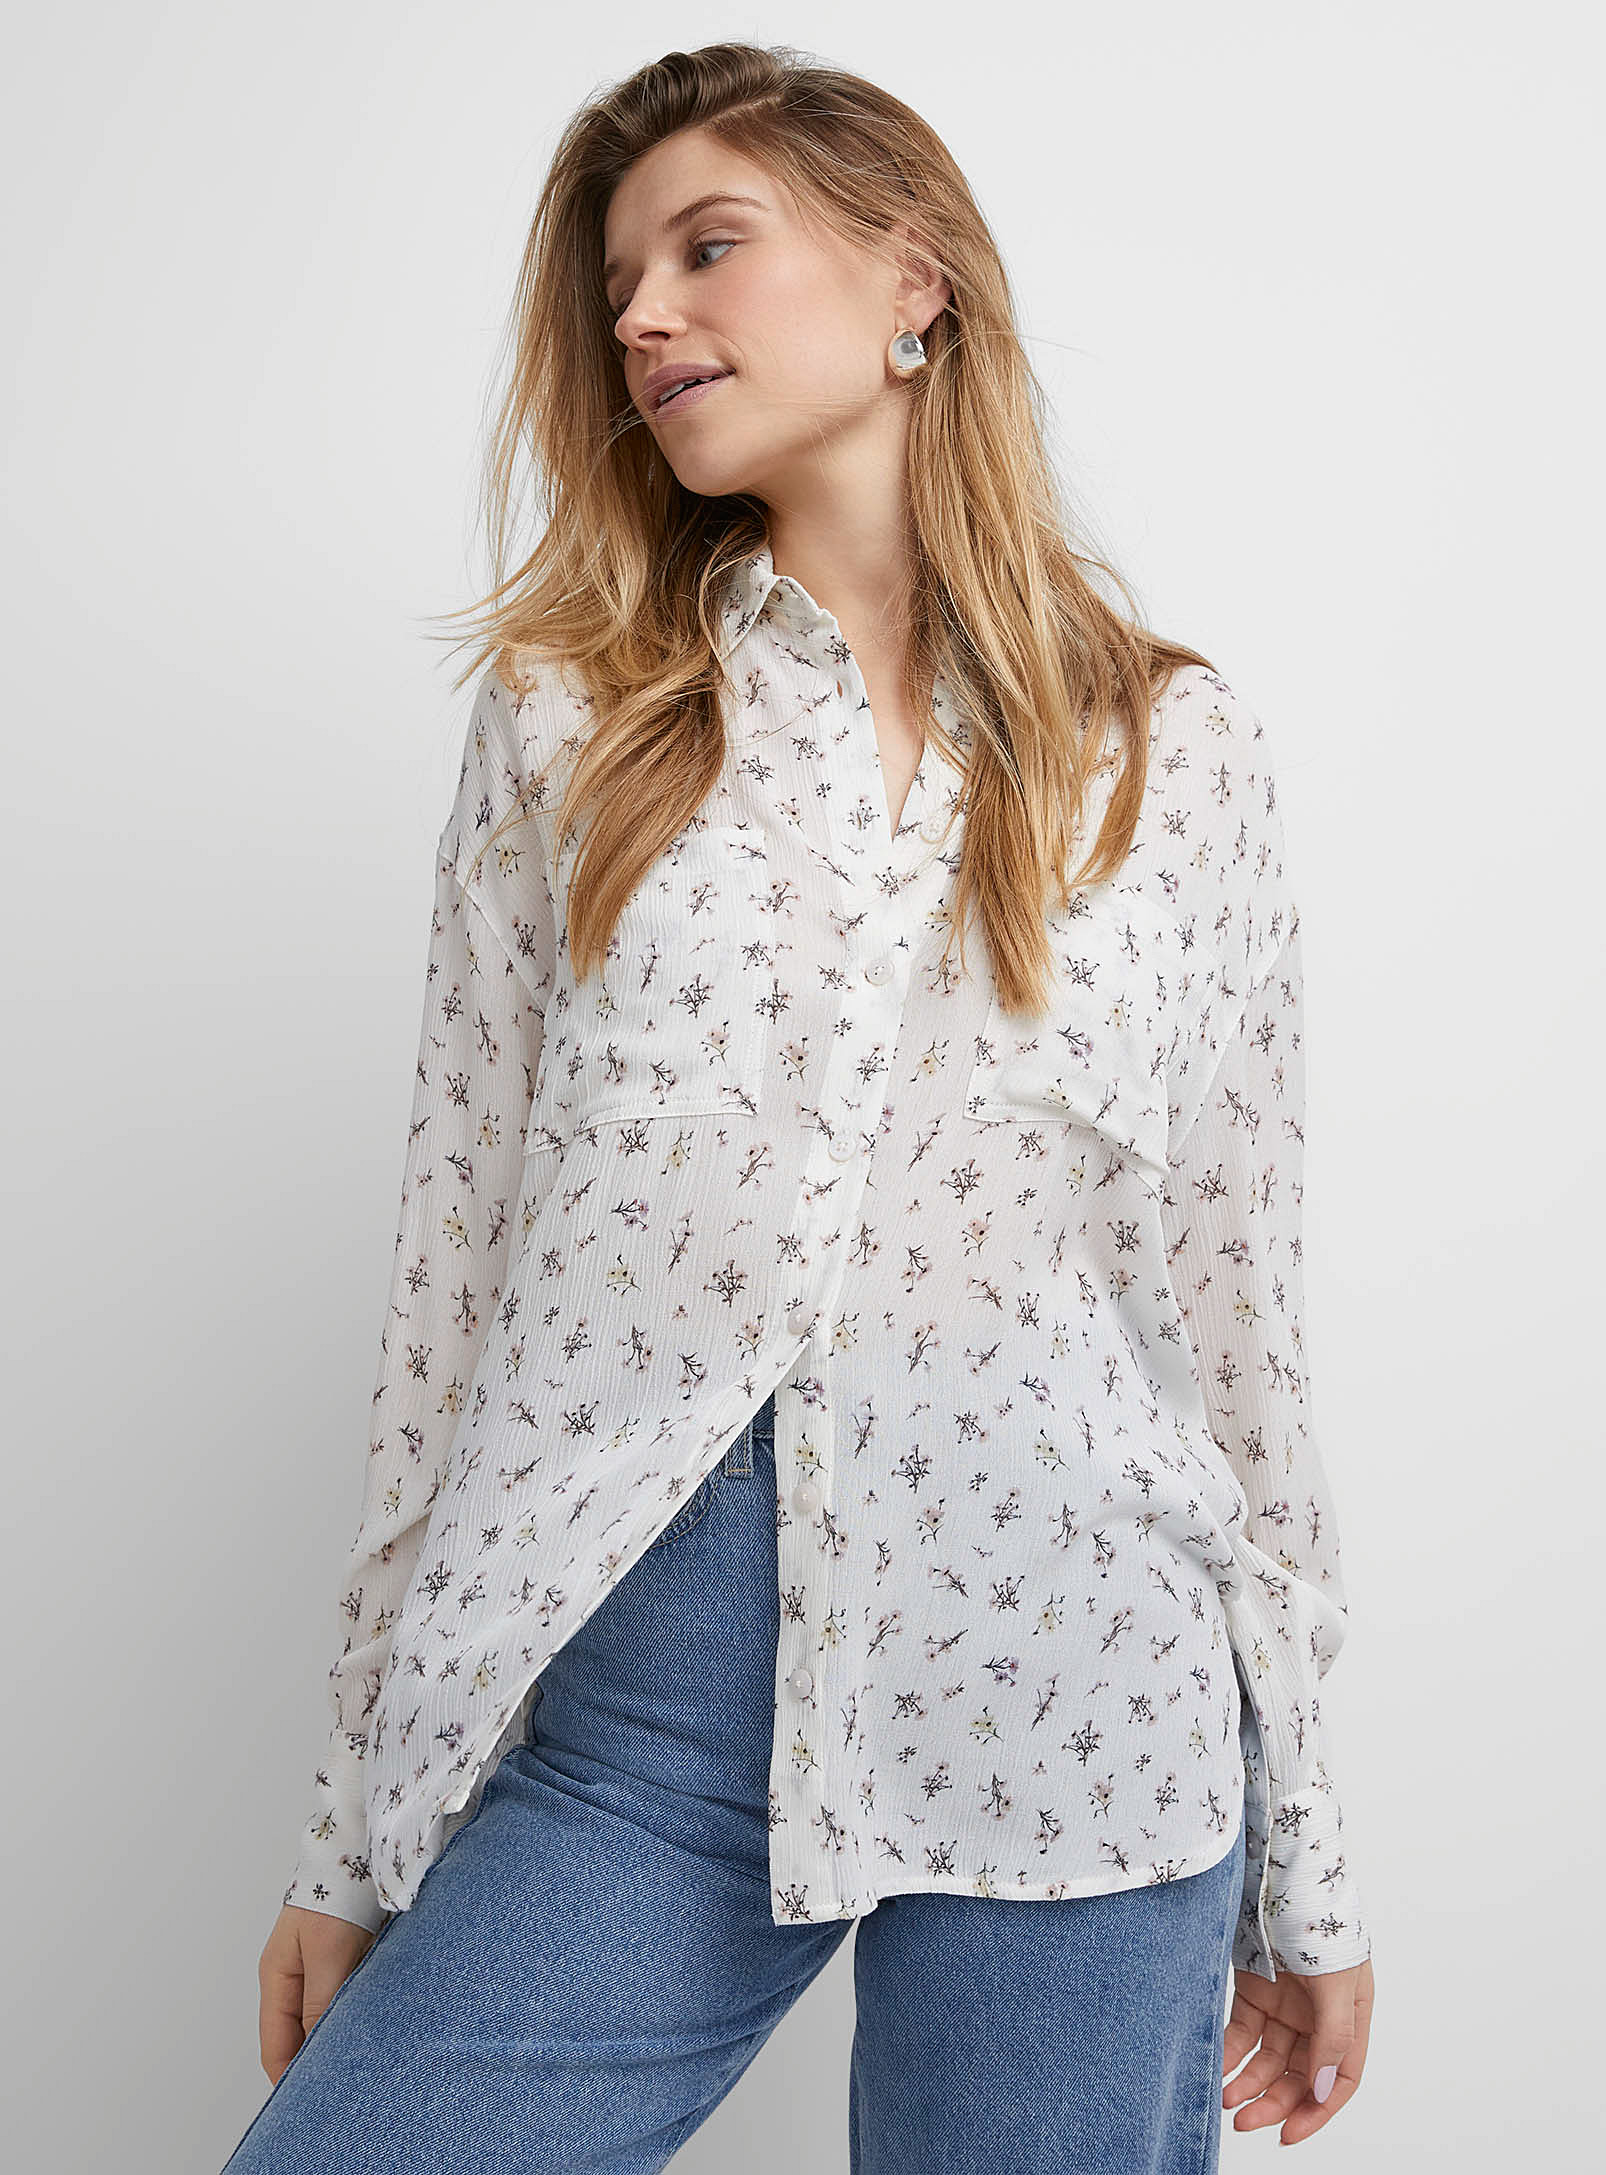 Icone Wrinkled Texture Printed Loose Shirt In Patterned White